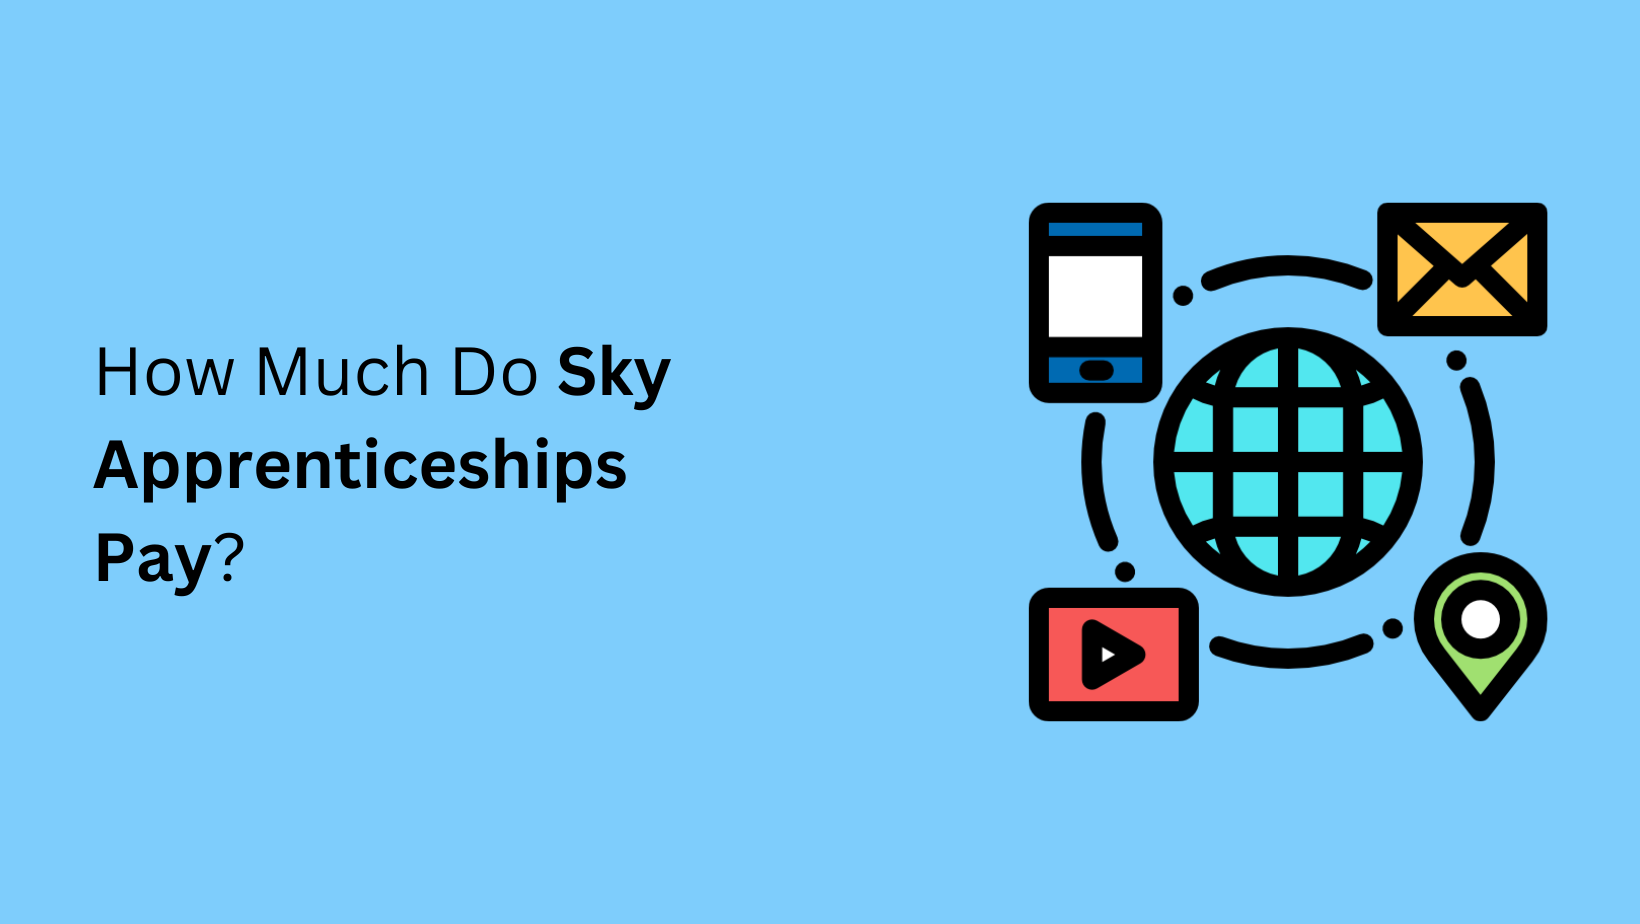 How Much Do Sky Apprenticeships Pay